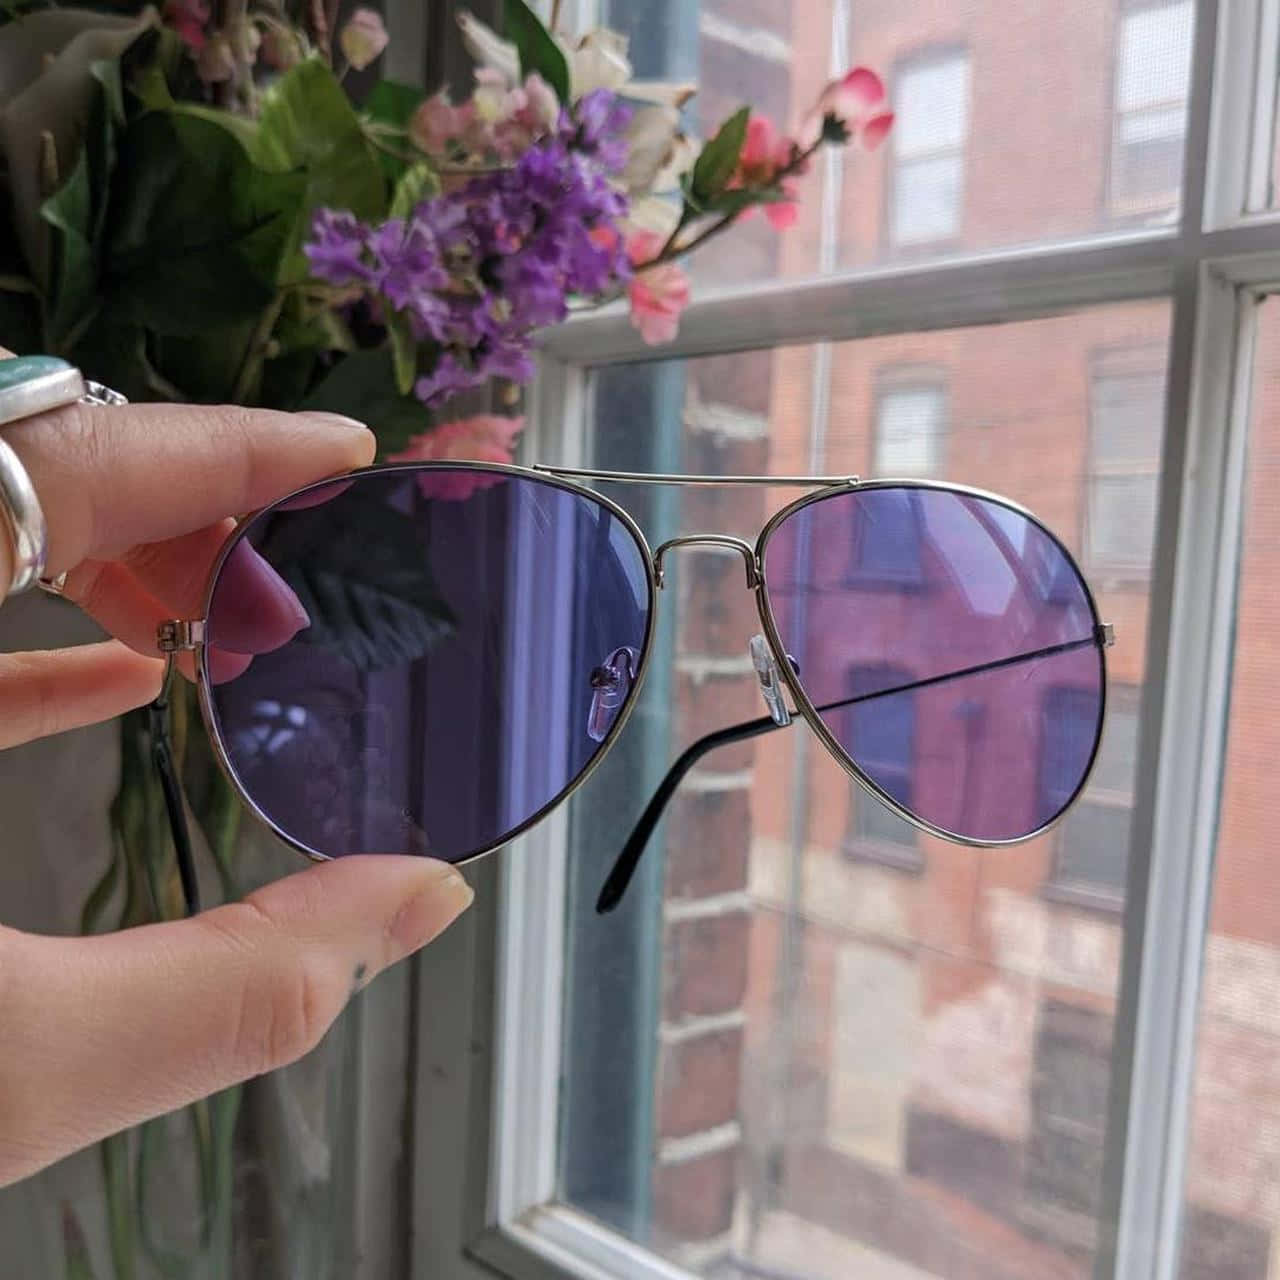 Complete your look with sharp purple sunglasses Wallpaper